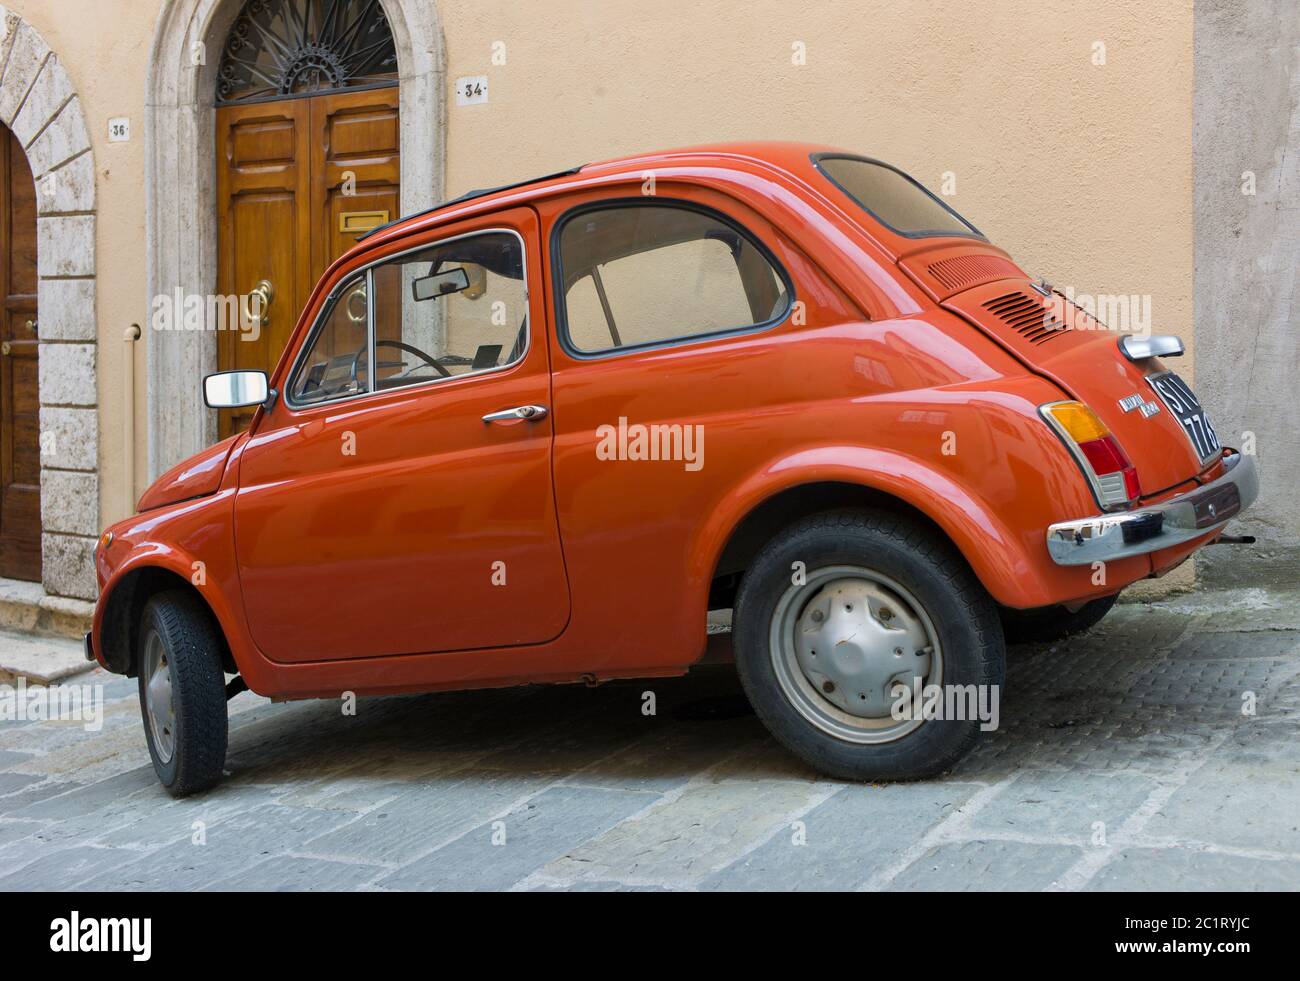 An old red Fiat 500 parked in a street of the City of Padua, Italy Stock Photo